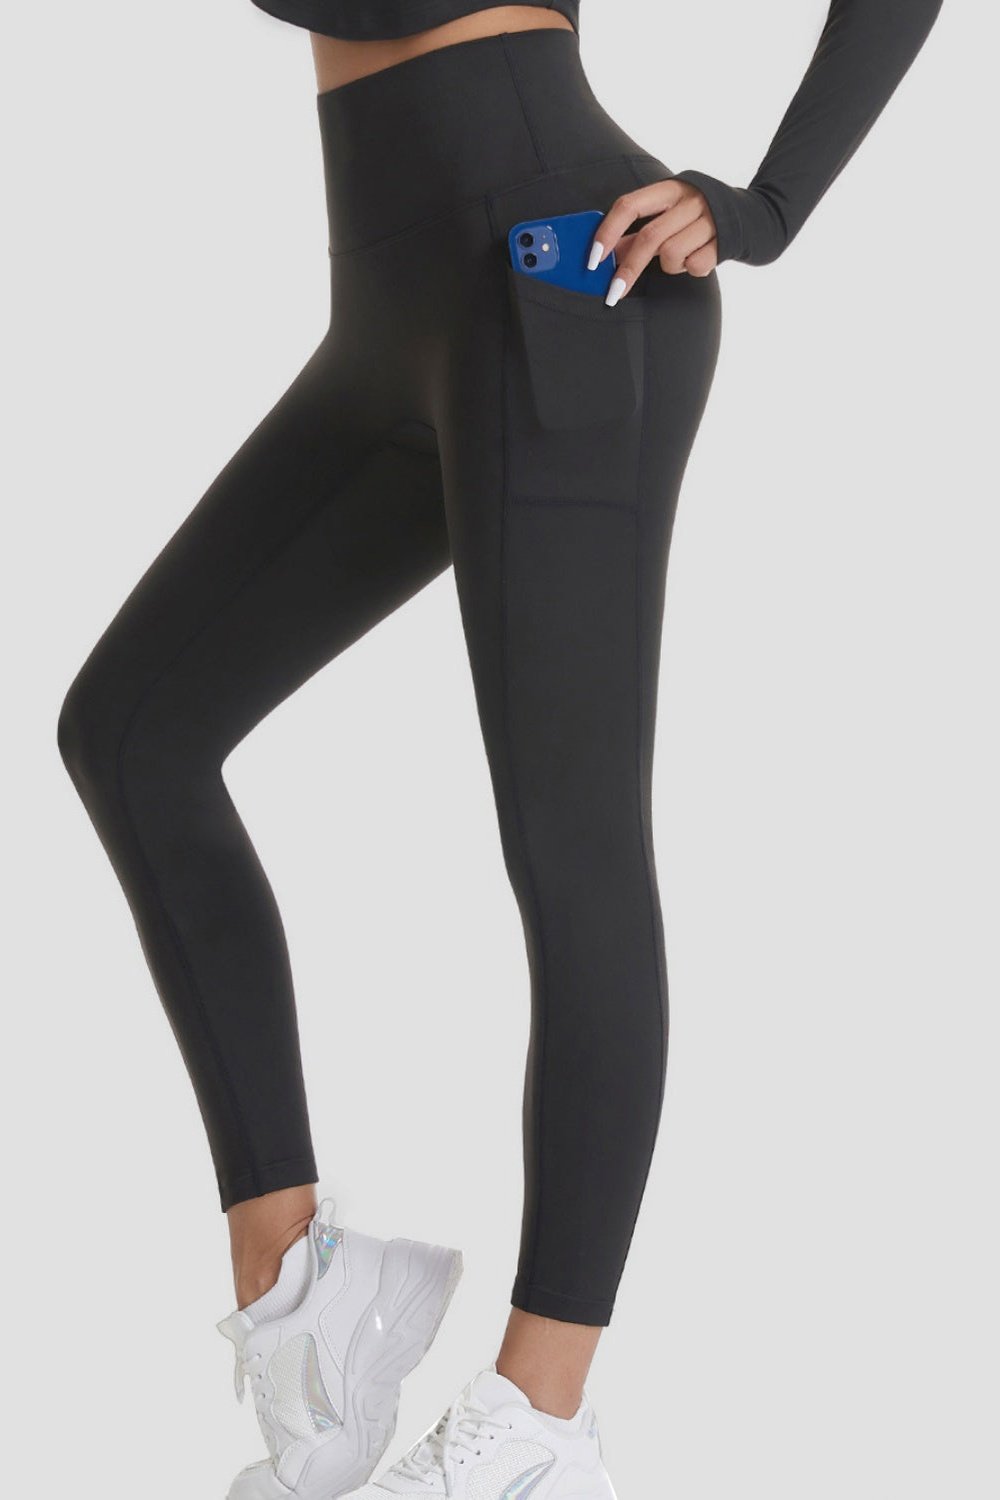 Pocketed High Waist Active Pants - Leggings - FITGGINS